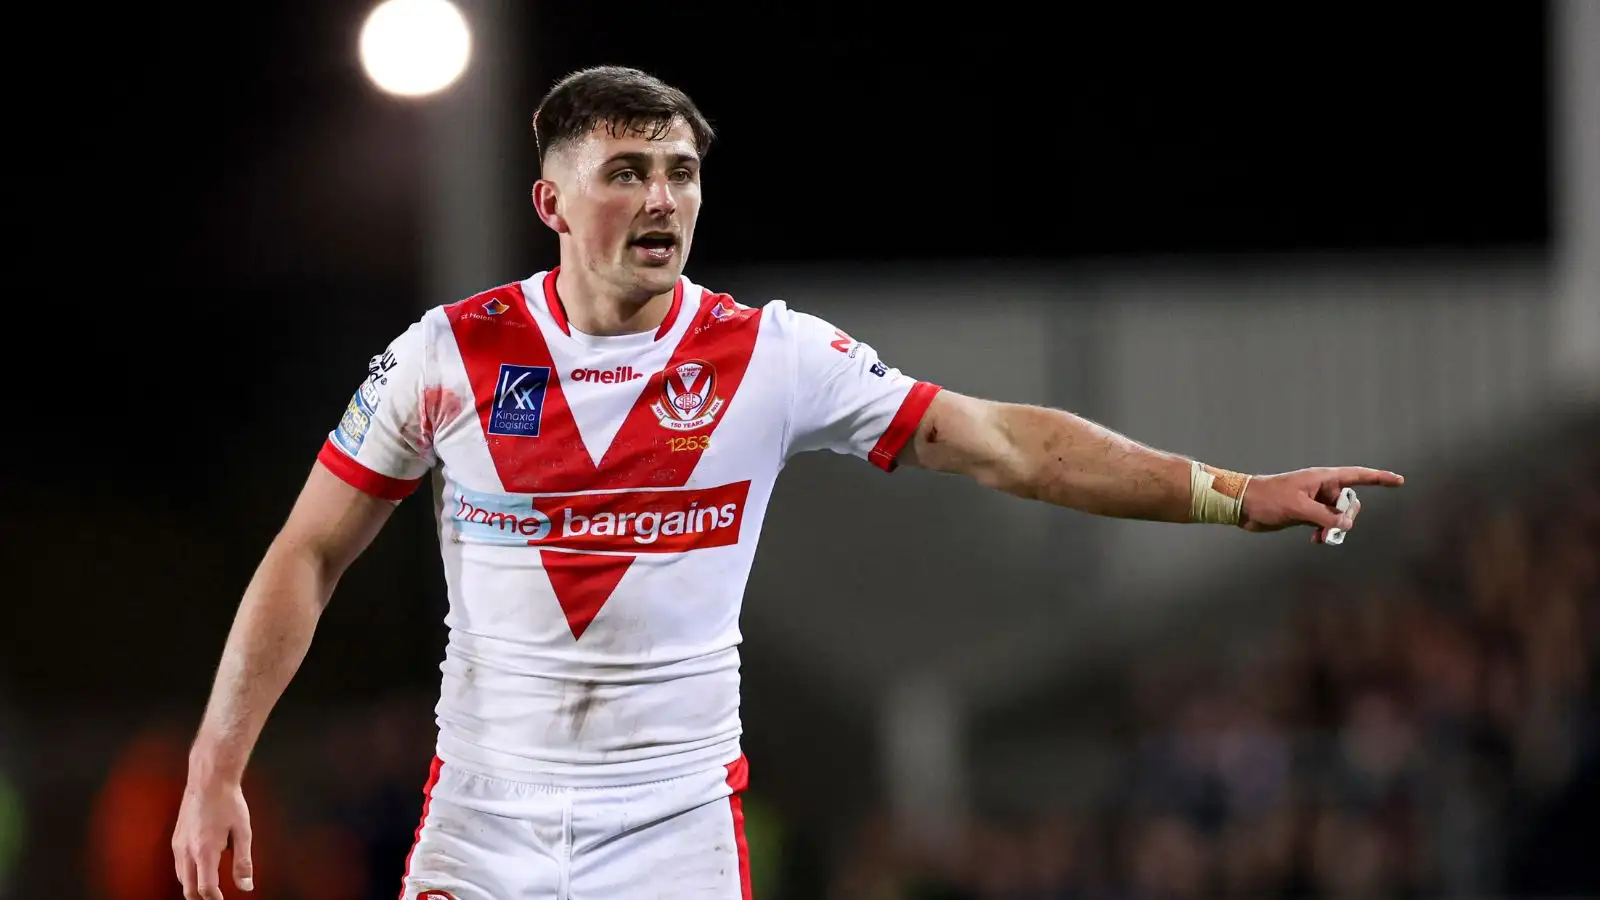 St Helens coach on Lewis Dodd future following fresh NRL speculation